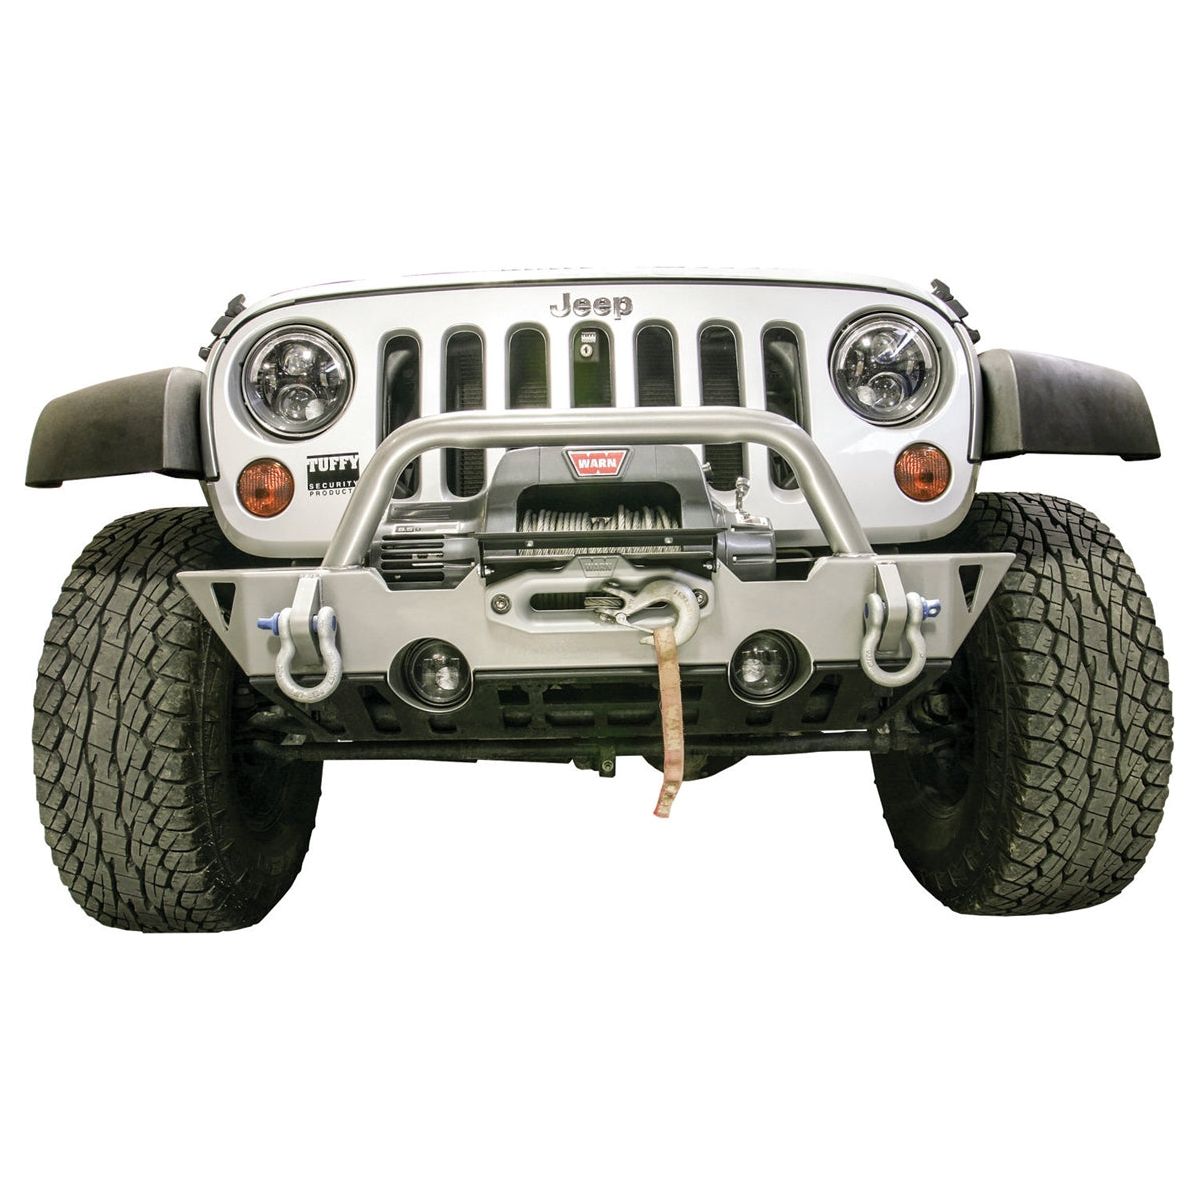 Tuffy Flip-Up License Plate Holder for Winch (Universal Fit)